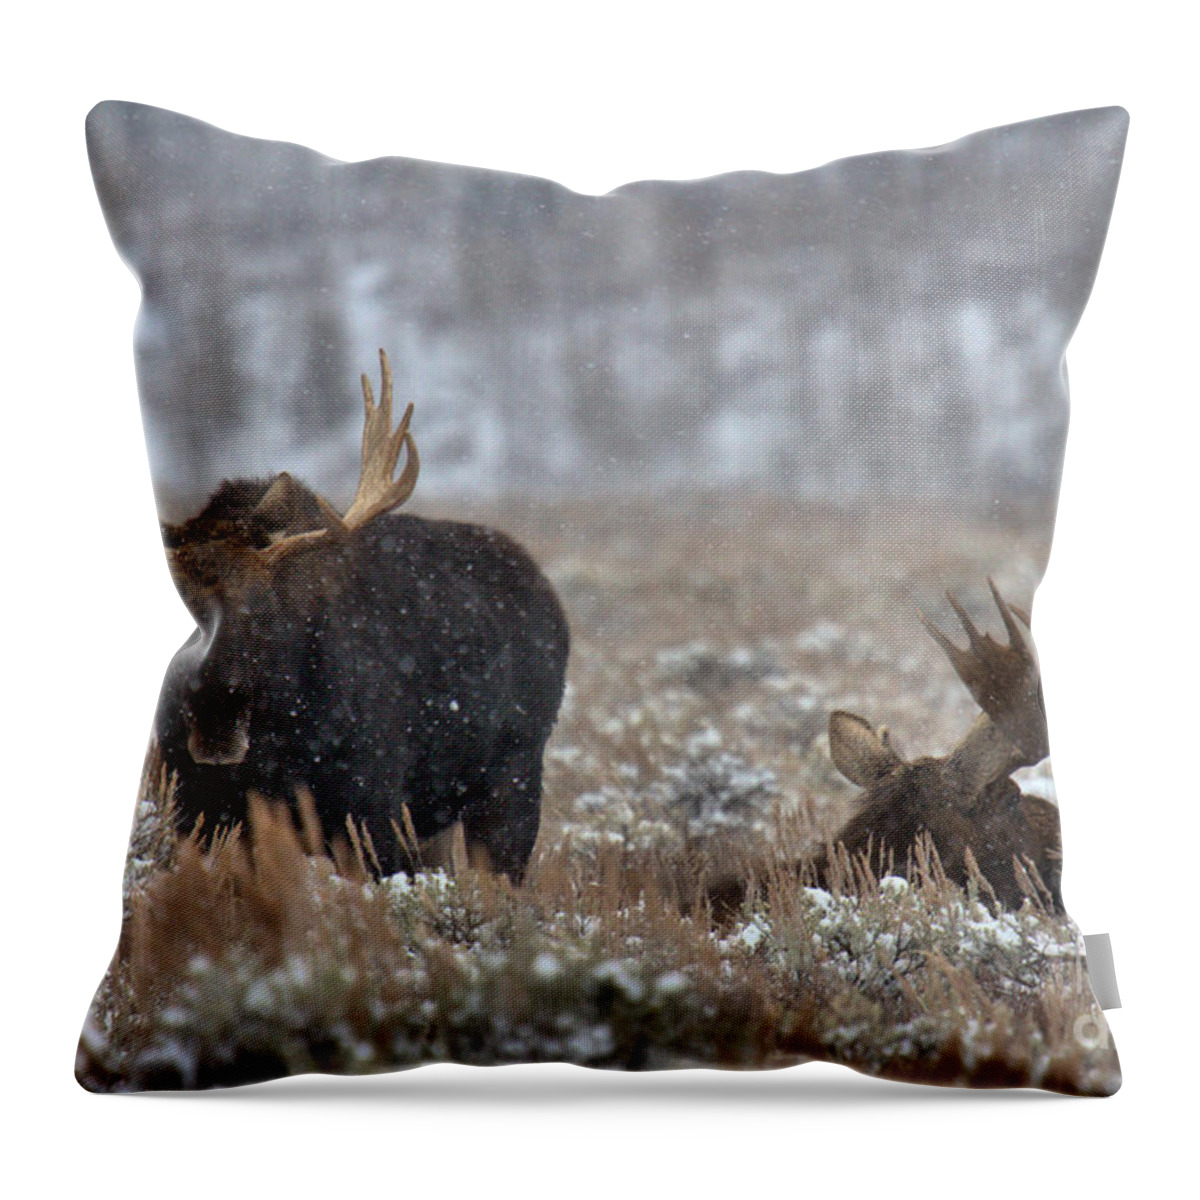  Throw Pillow featuring the photograph Bull Moose Winter Wandering by Adam Jewell